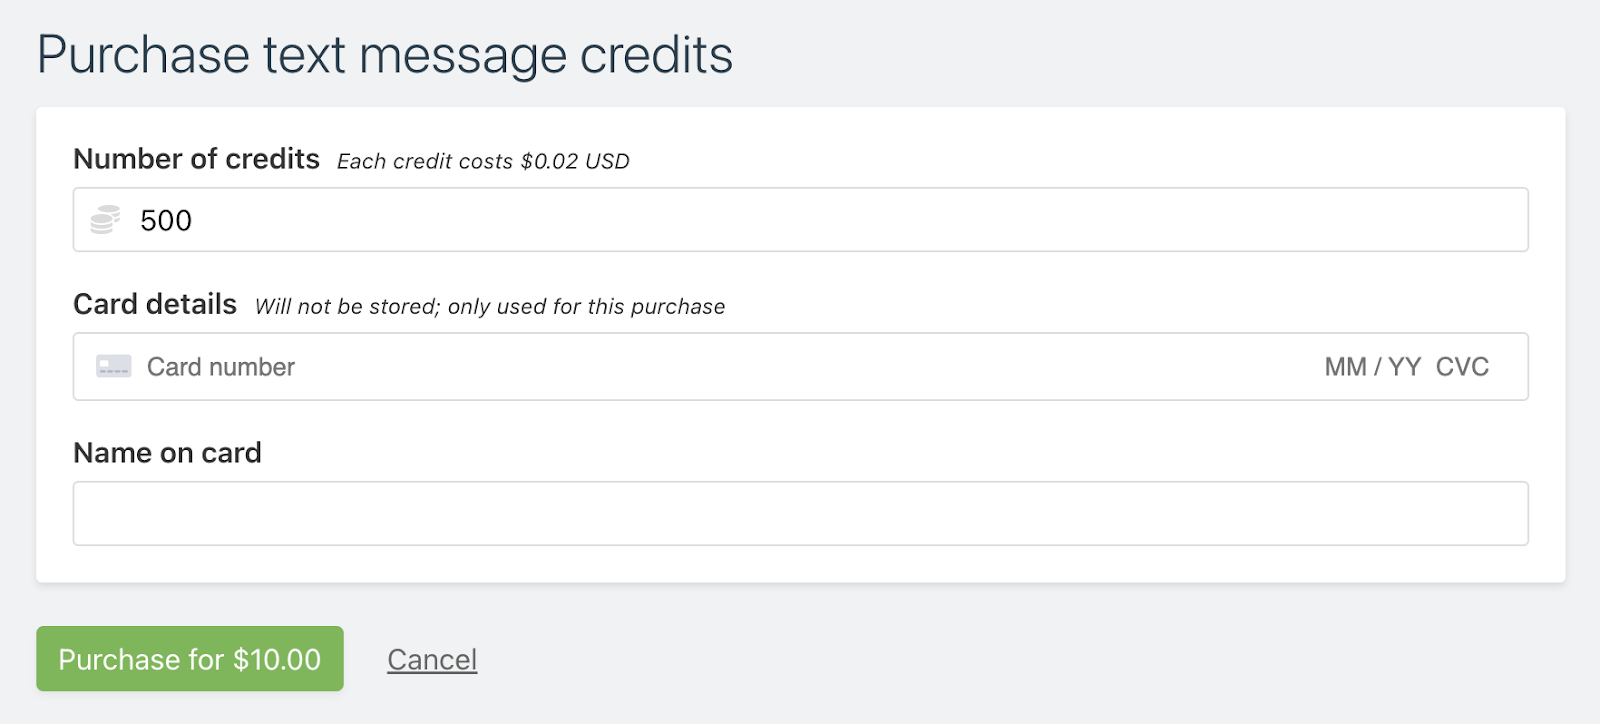 Our new text message credits system